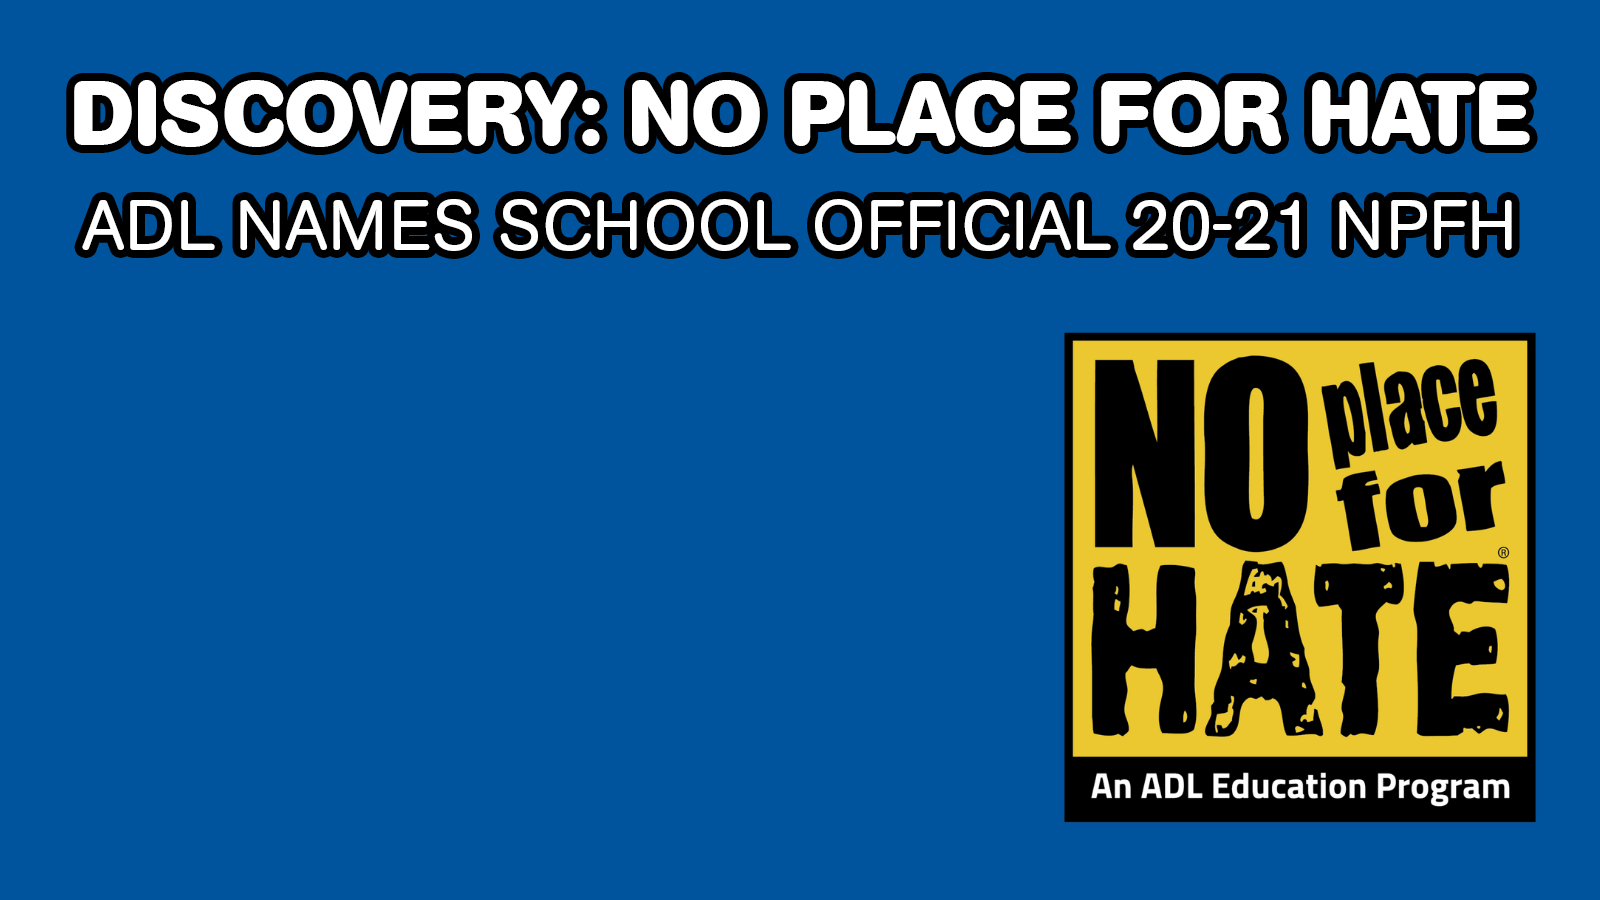 Discovery: No Place for Hate. ADL names school NPFH for 20-21.